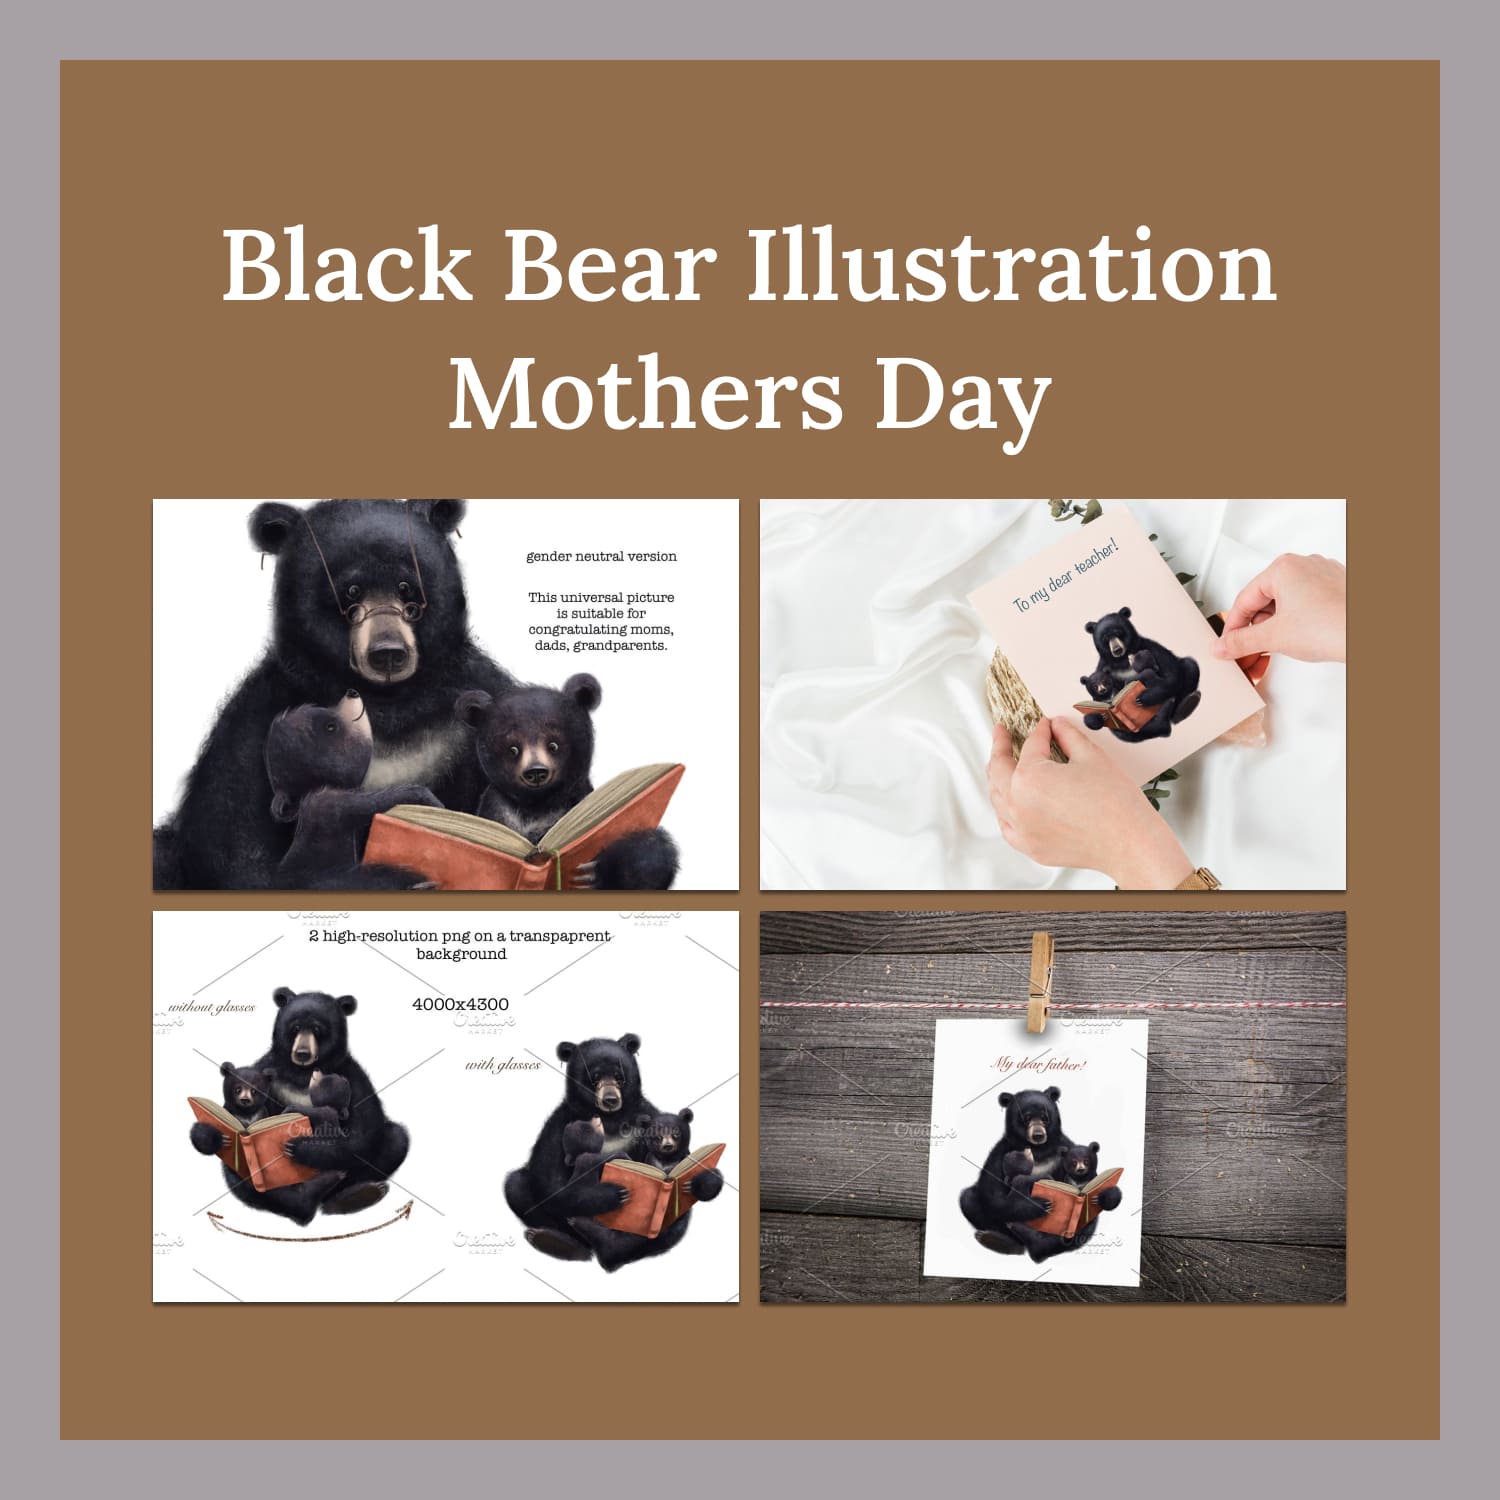 Black bear illustration. mothers day - main image preview.